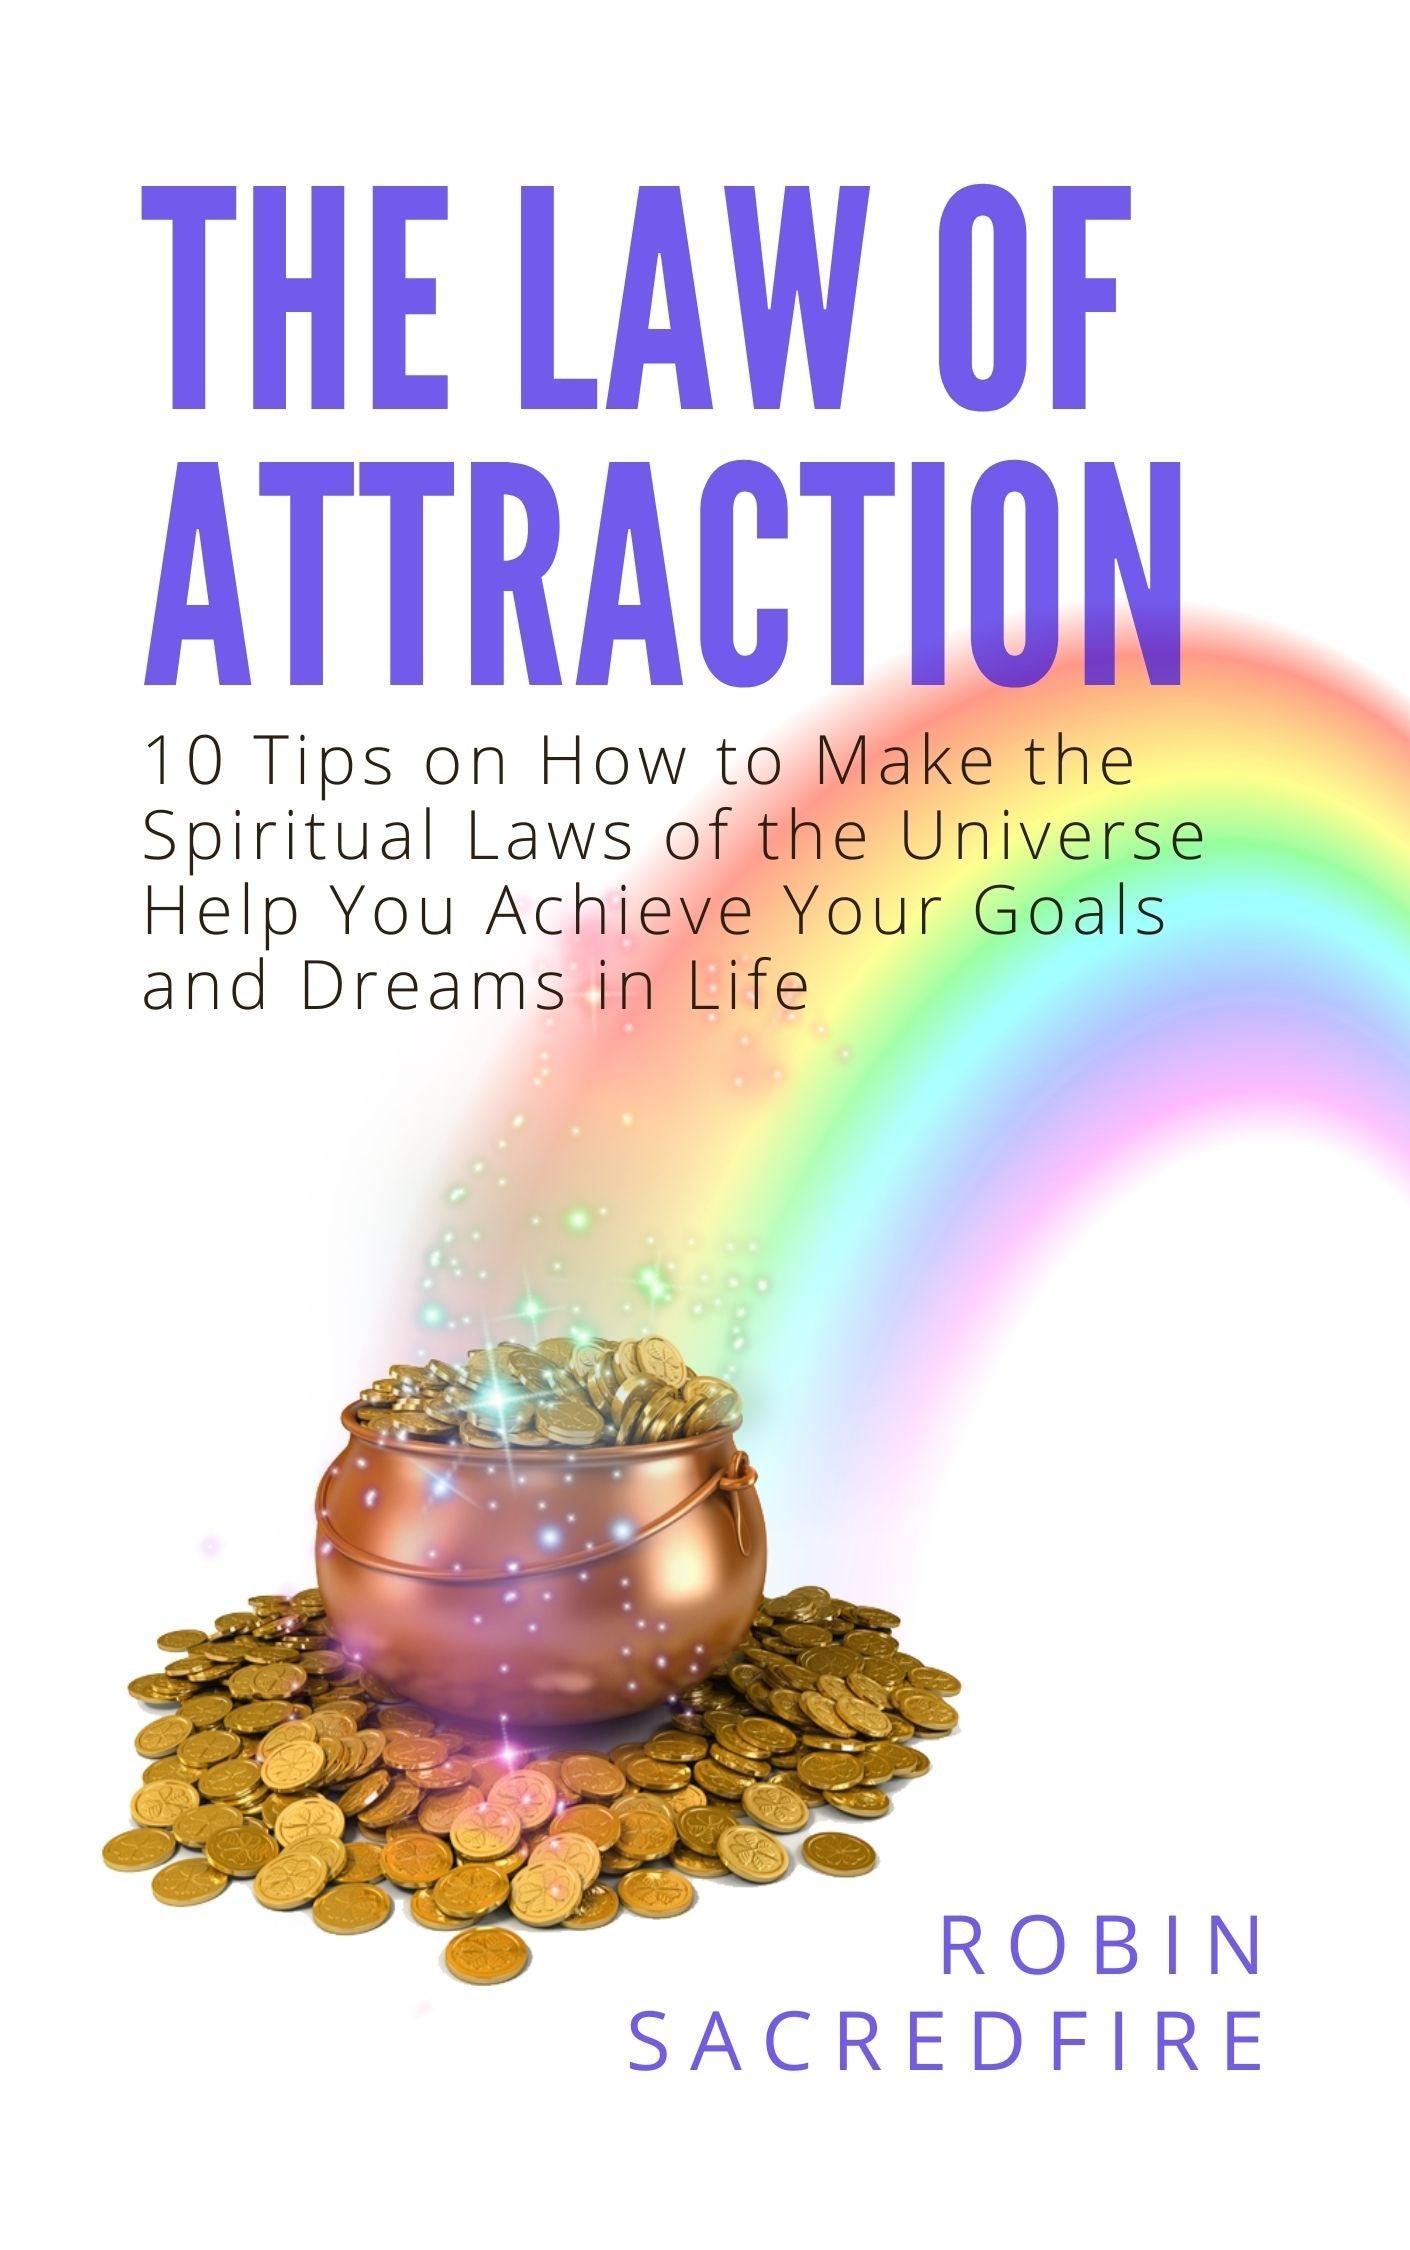 The Law of Attraction - 22 Lions